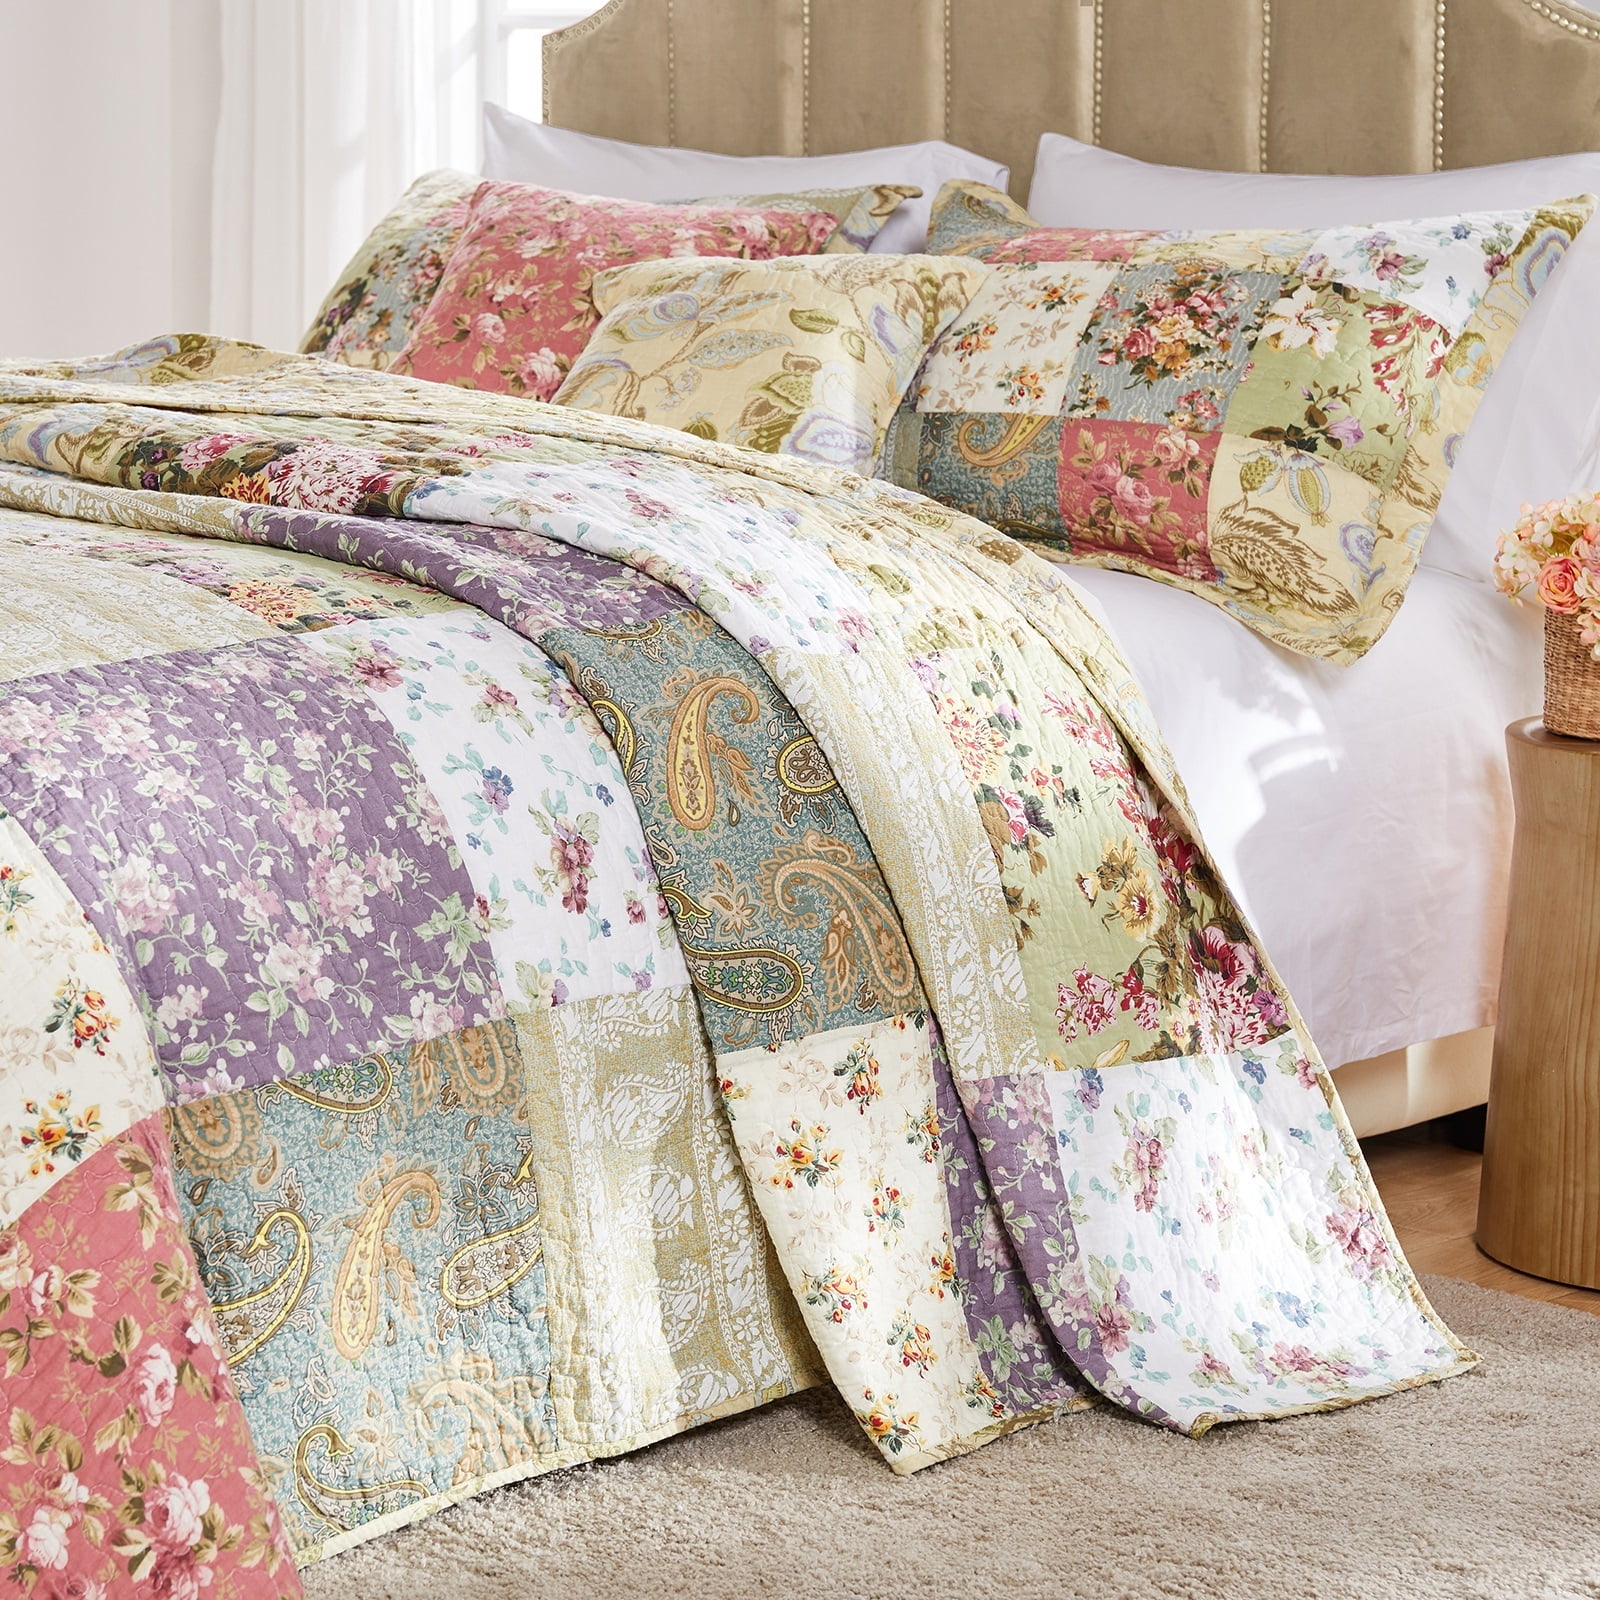 Details about   Floral Multi Print 100% Pure Cotton Fabric Bed Sheet With 2 Cushion Cover 